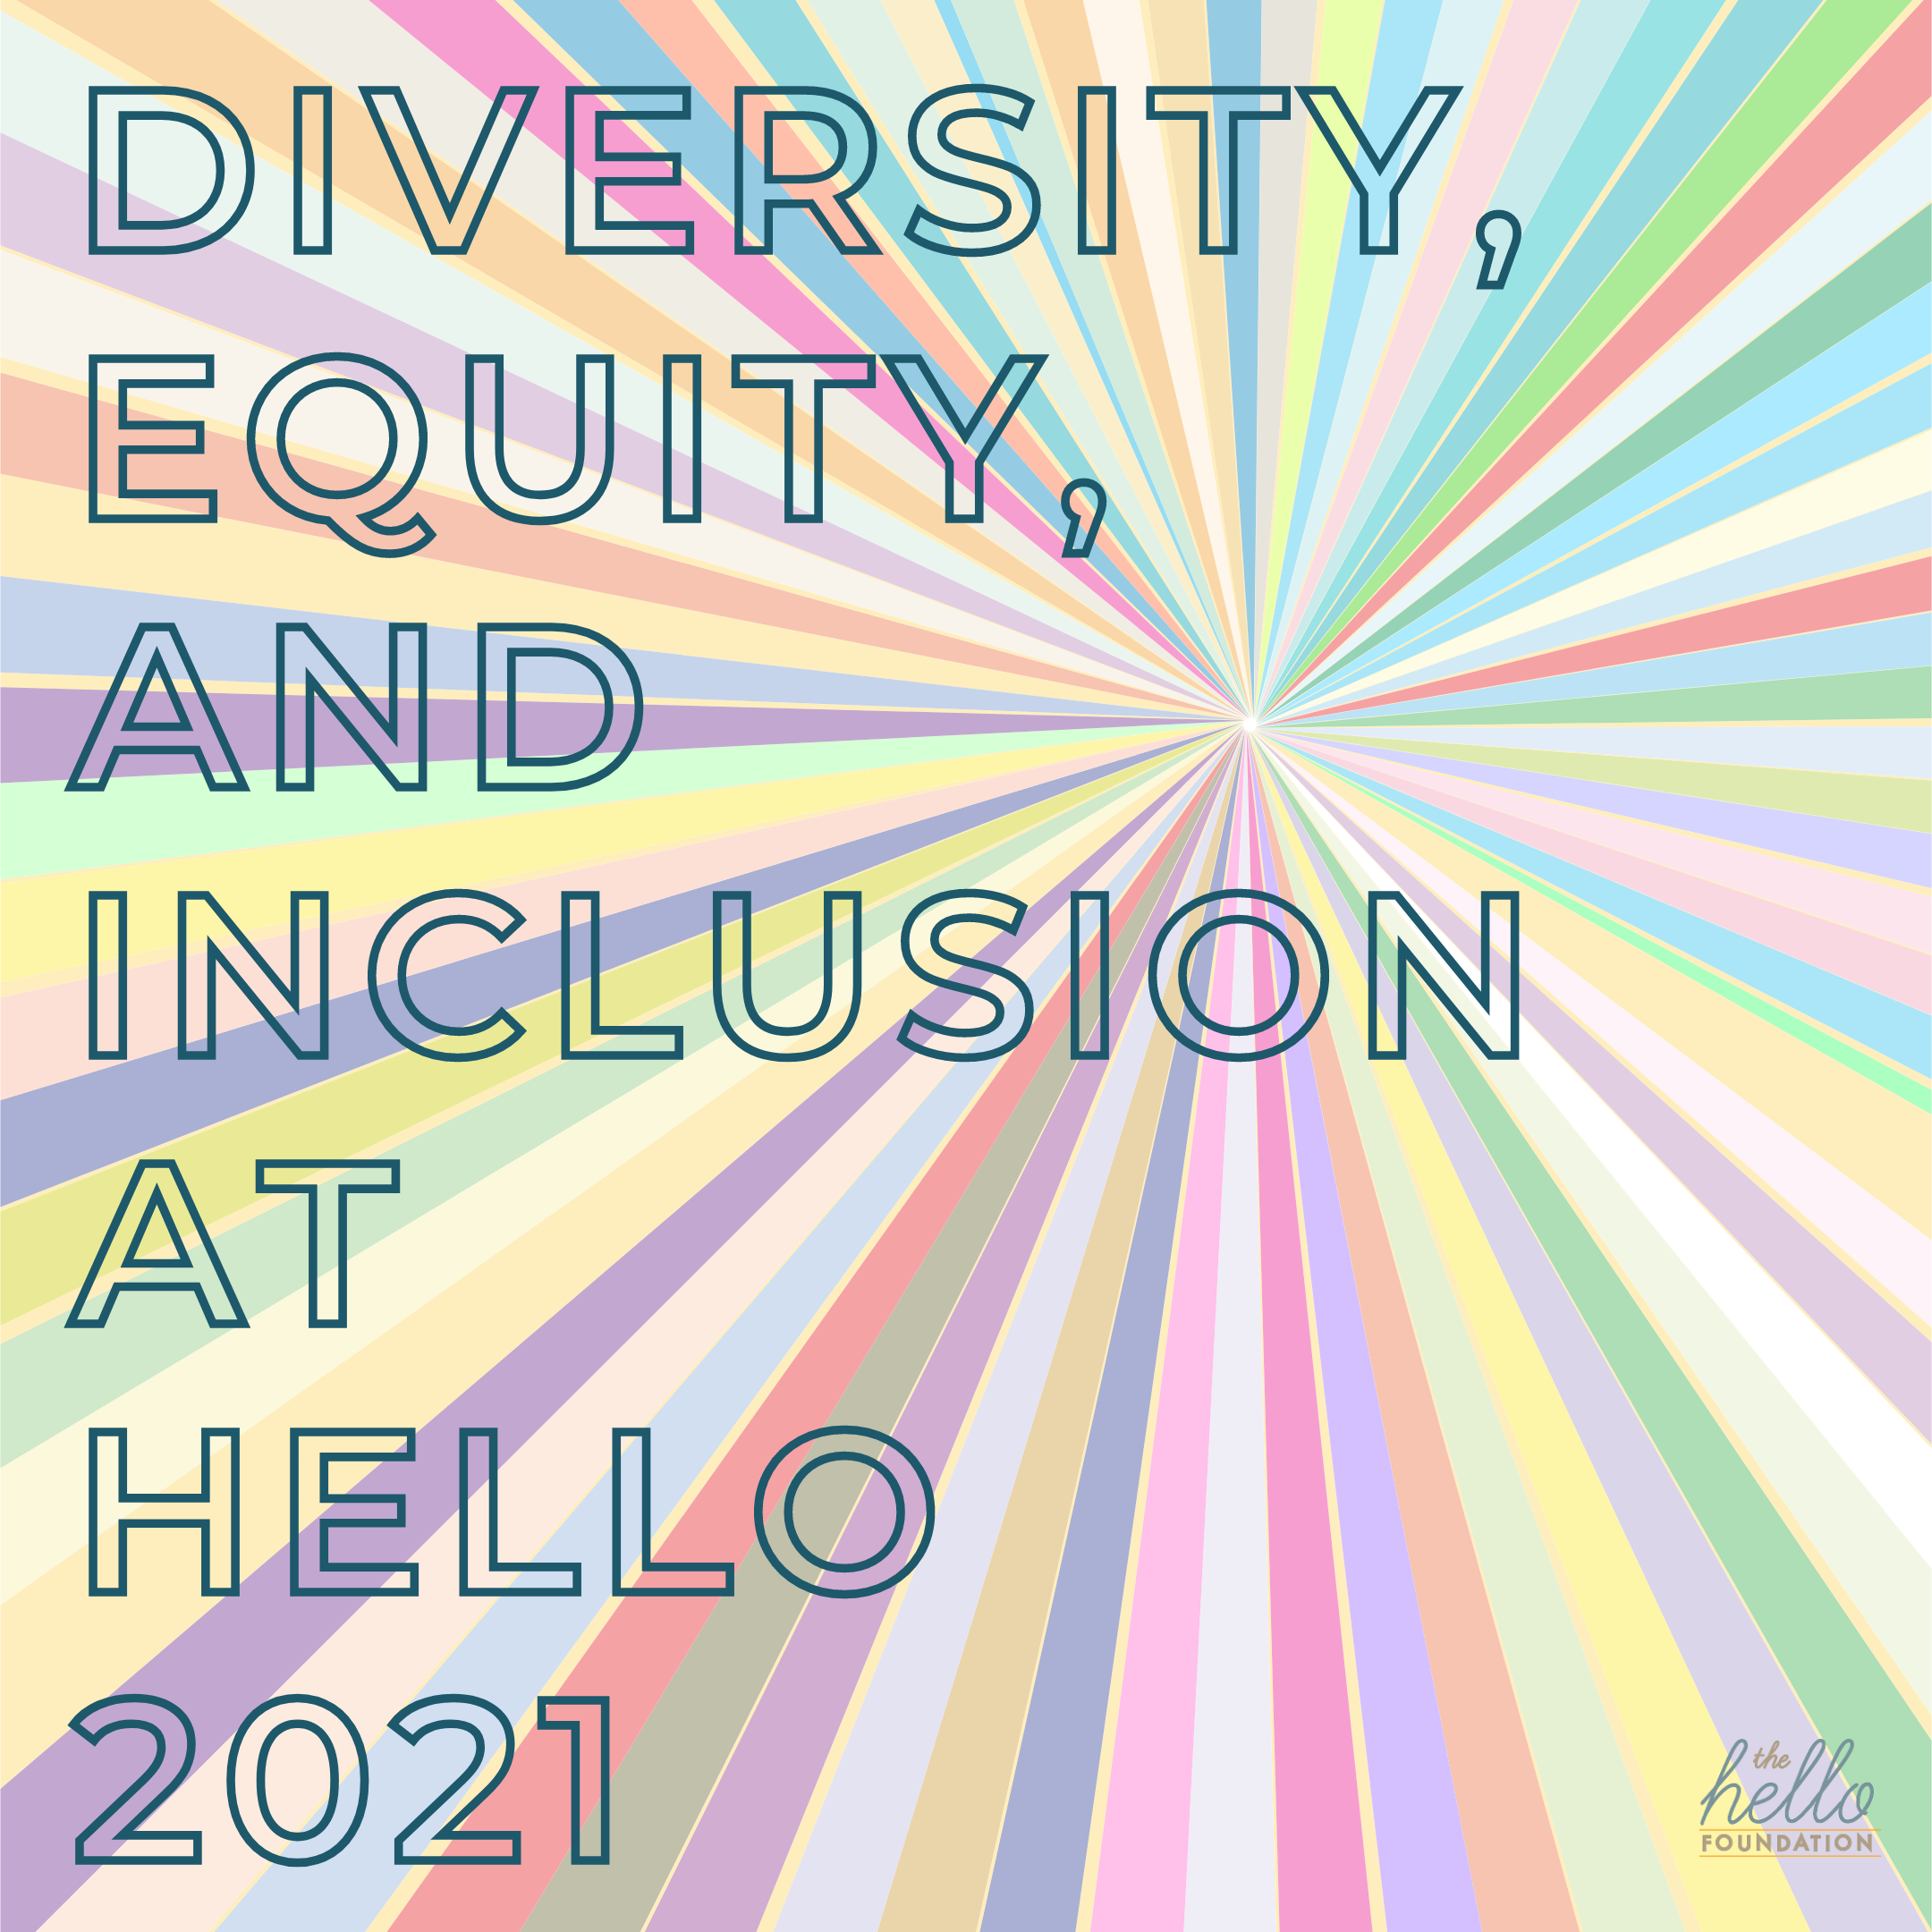 rainbow starburst with words "diversity equity and inclusion at hello 2021" overlaid